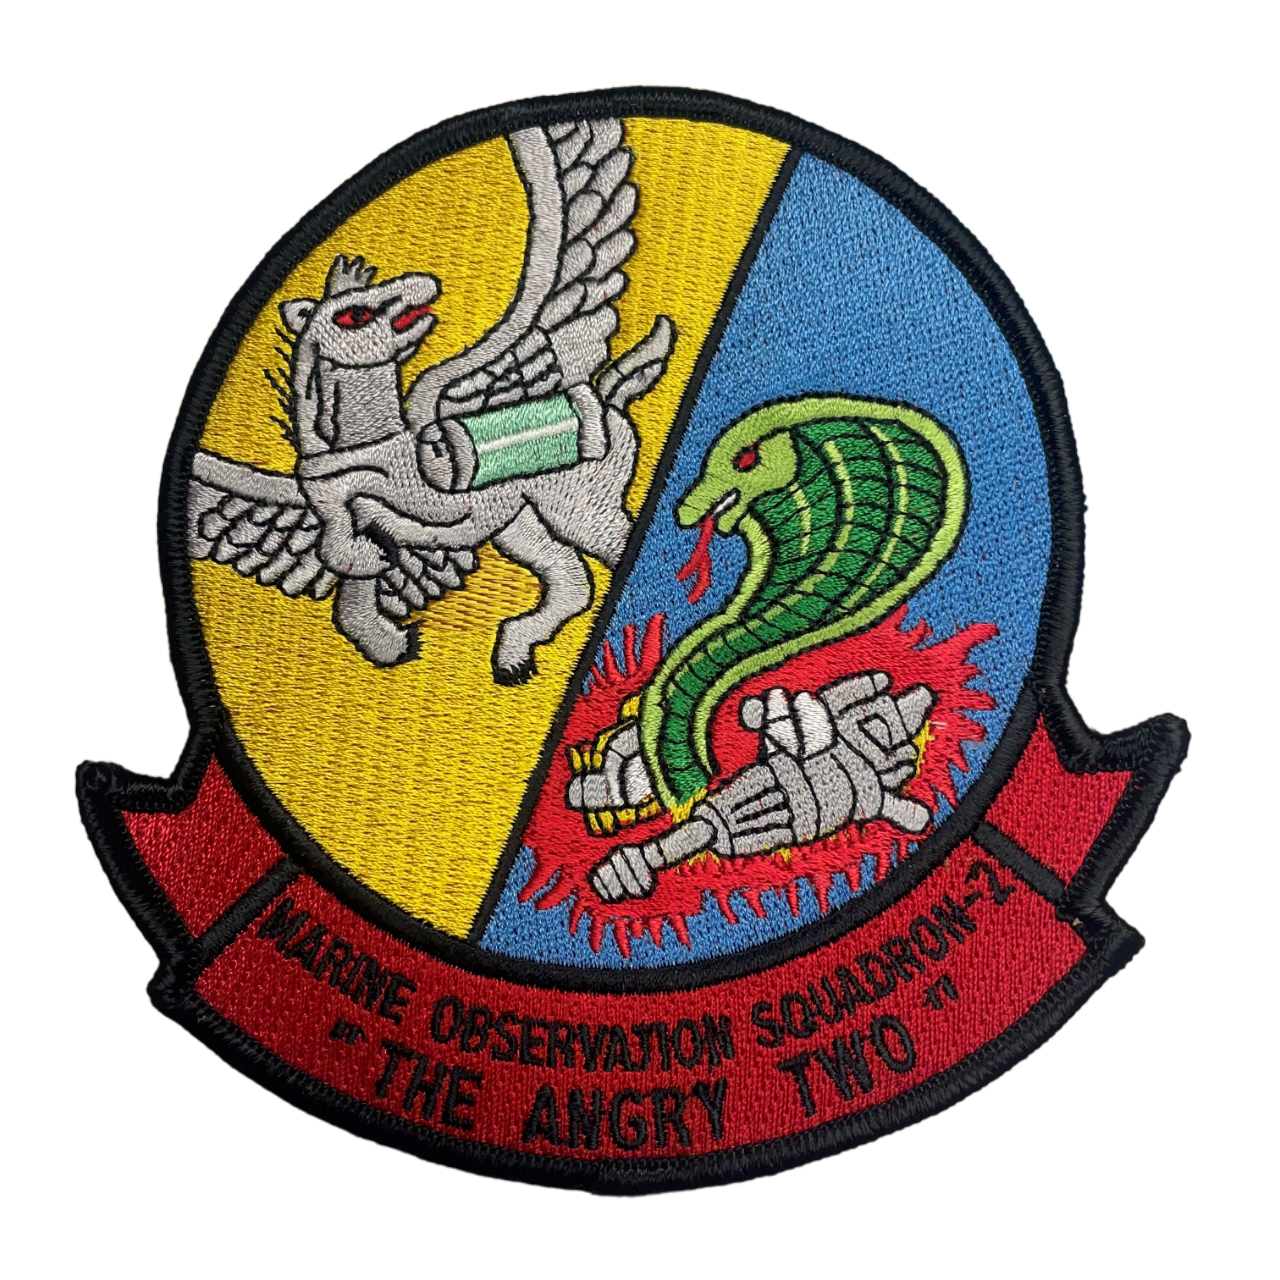 VMO-2 "The Angry Two" - Marine Observation Squadron USMC Patch